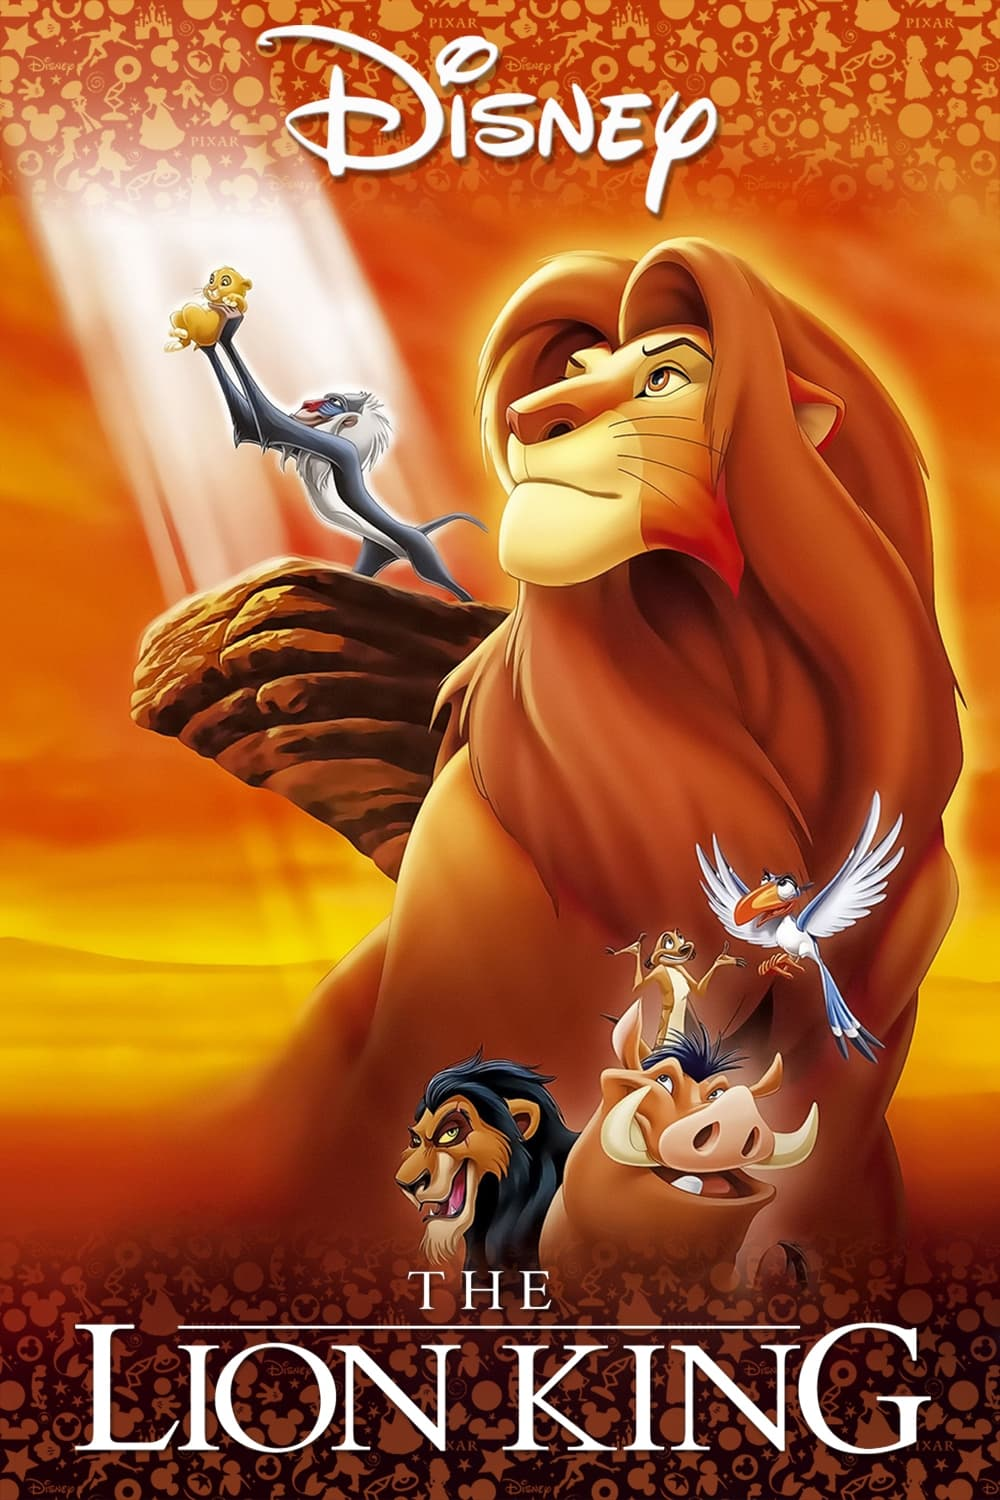 Best Christmas animated movies - 
The Lion King